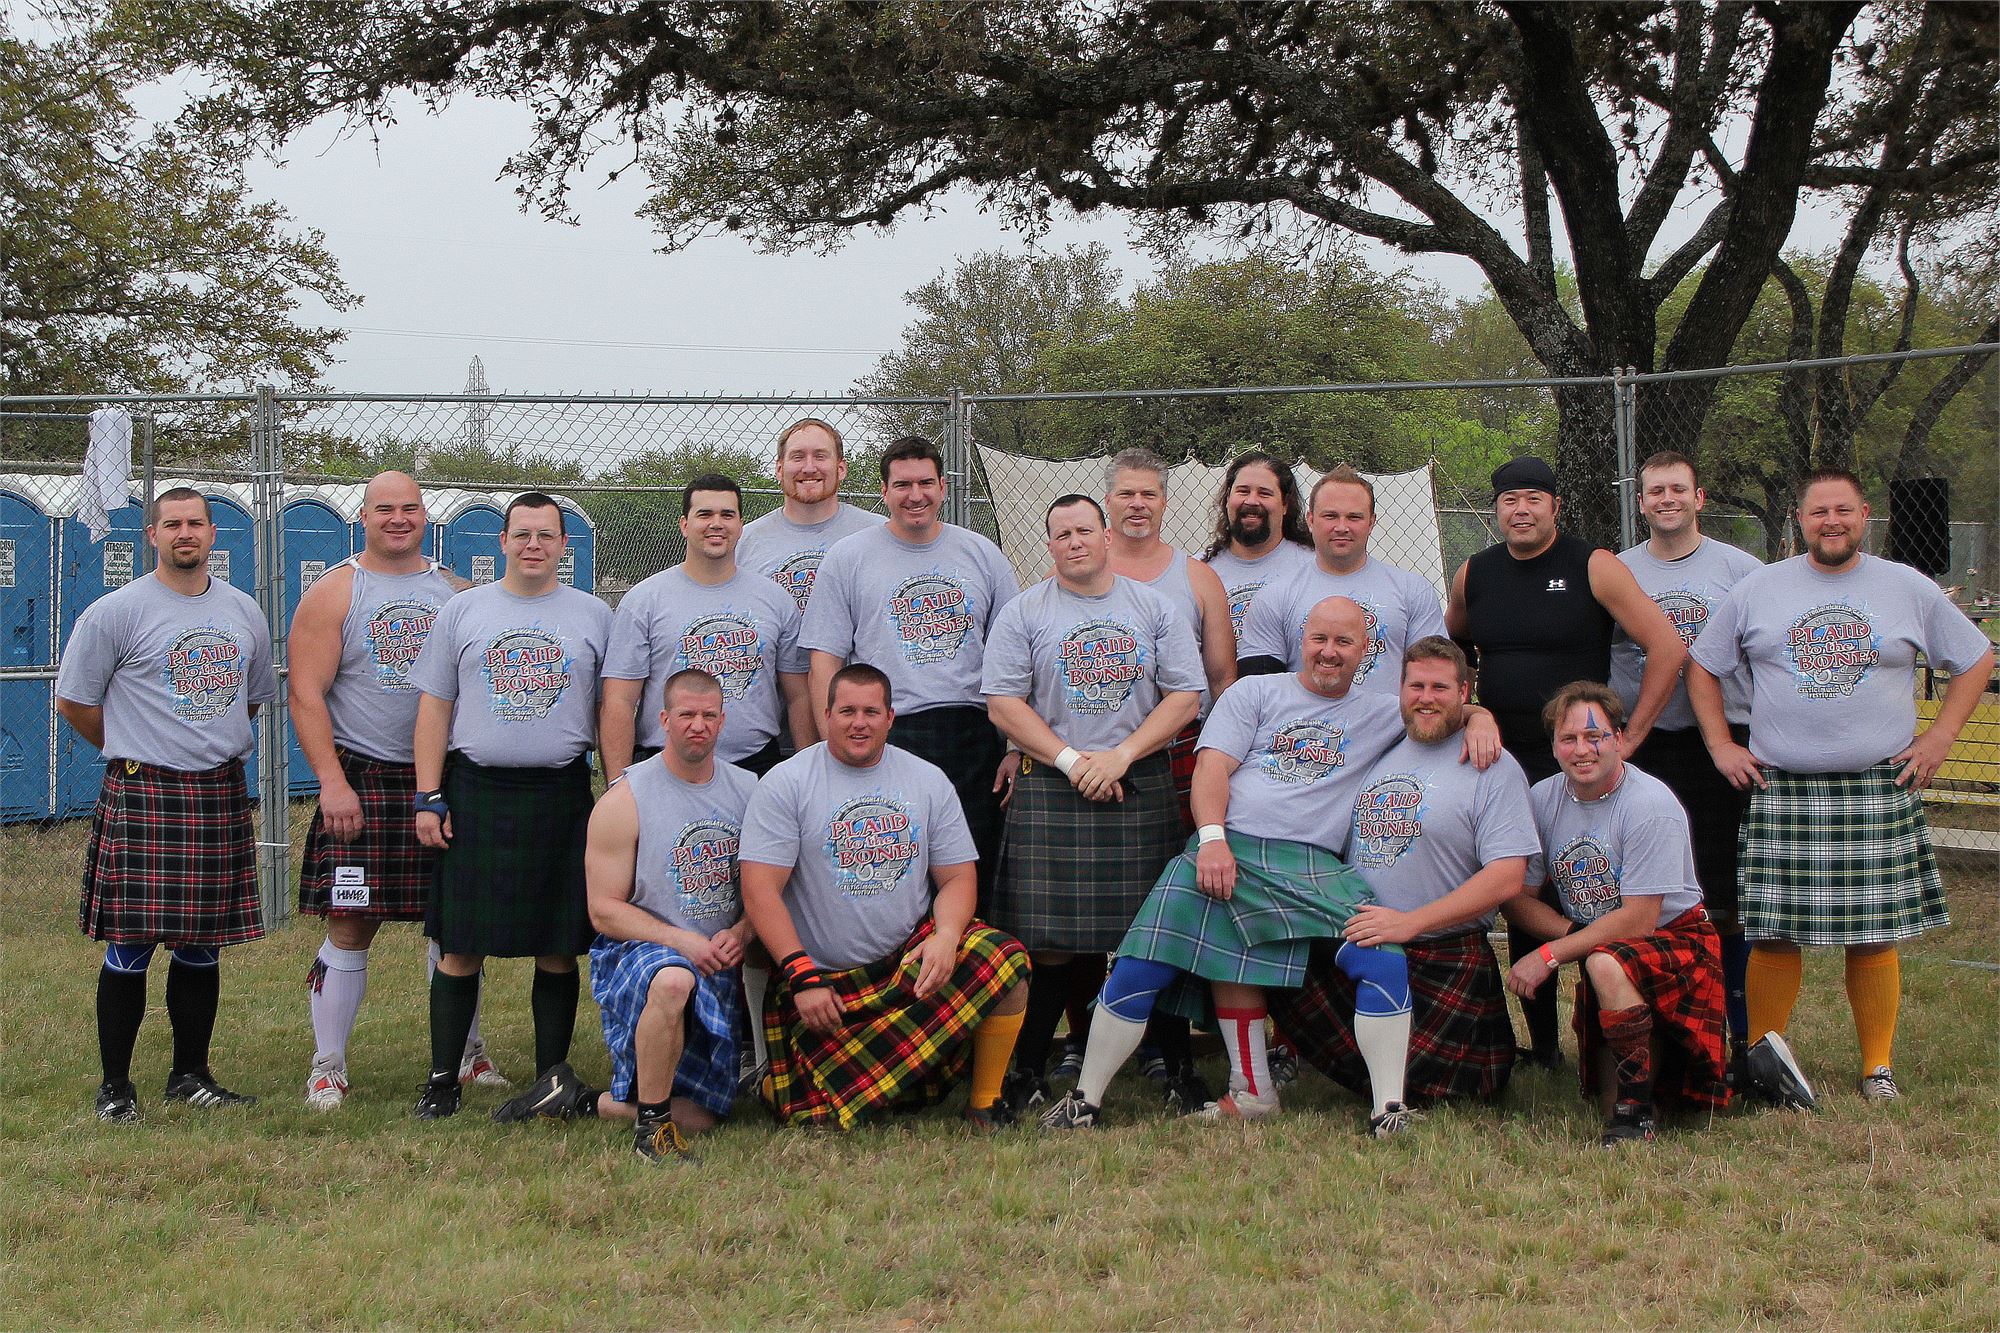 Busty Celtica fans!, at the San Antonio Highland Games